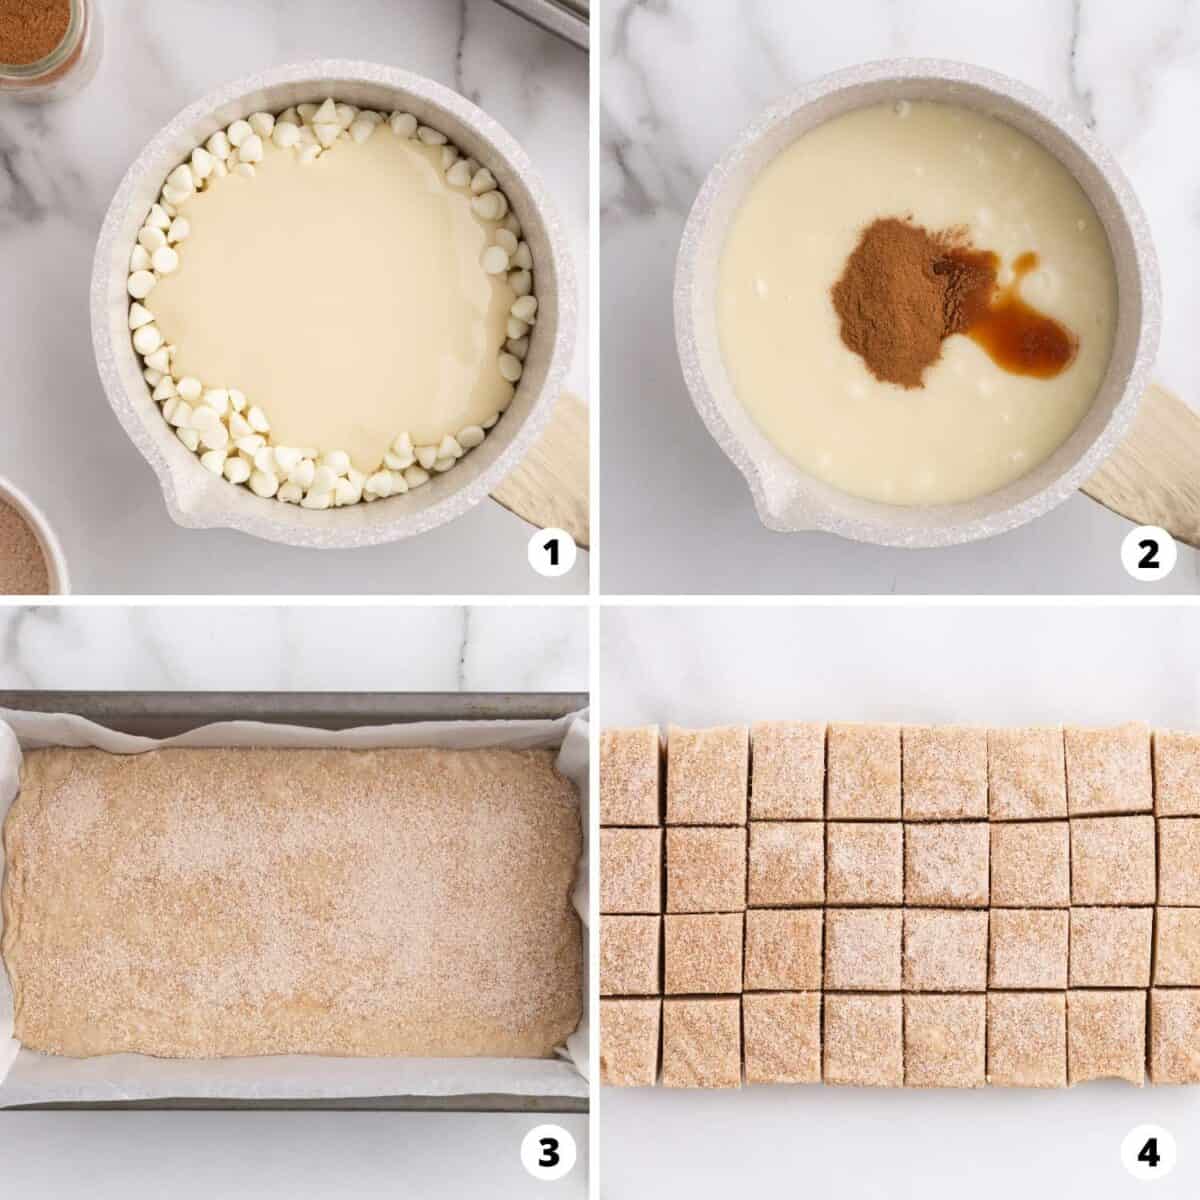 Steps showing how to make snickerdoodle fudge.